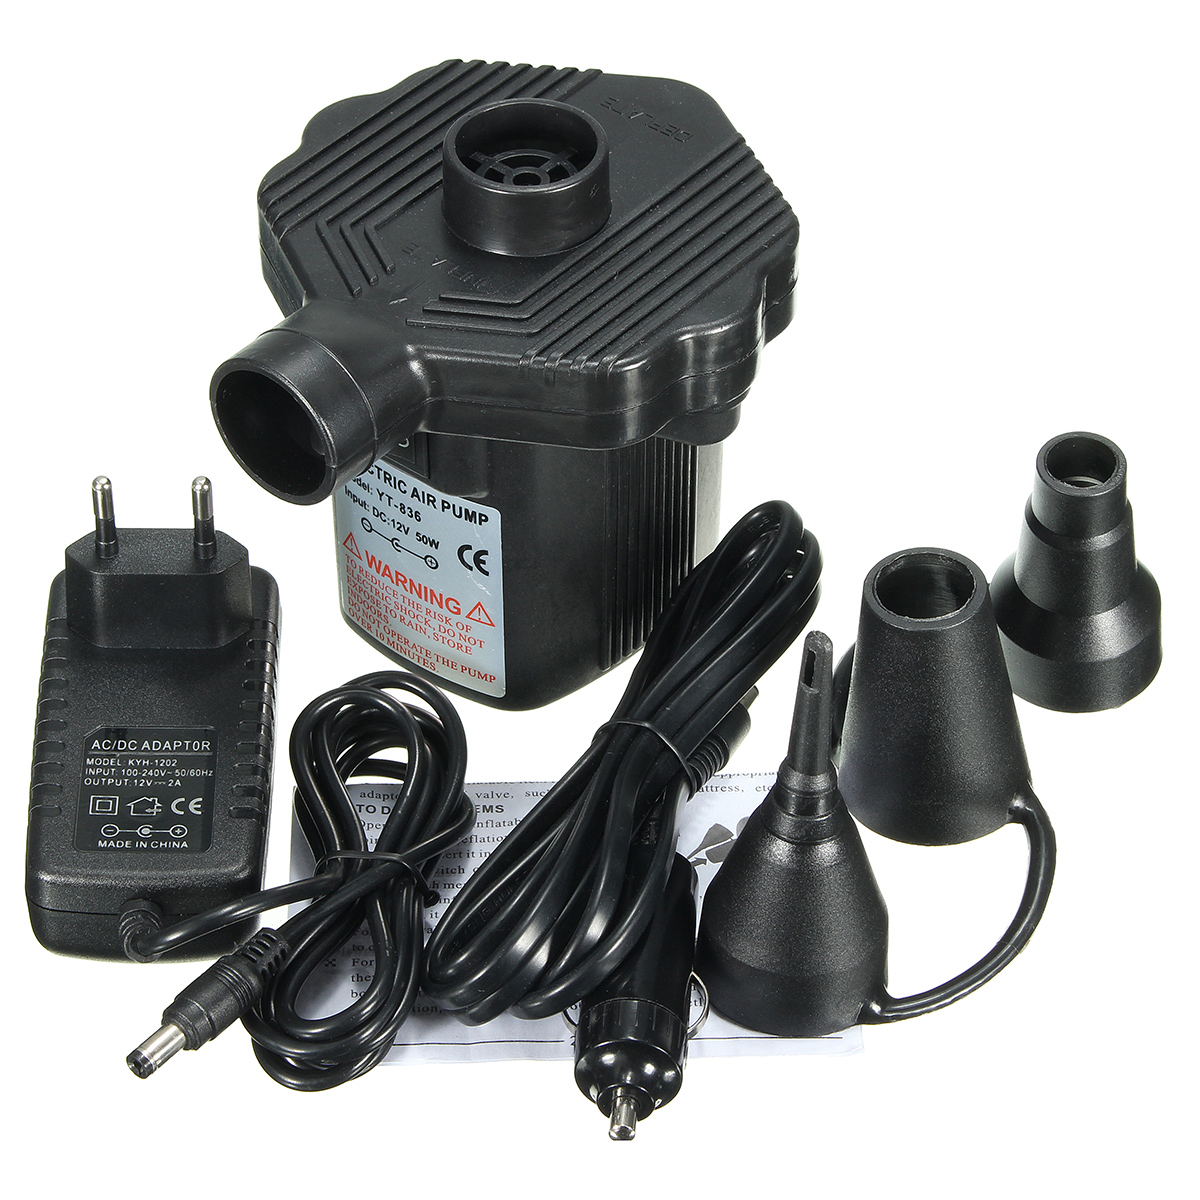 DC-12V-50W-Electric-Air-Pump-Electric-Pump-for-Household-and-Automobile-Pump-Inflator-1263537-1